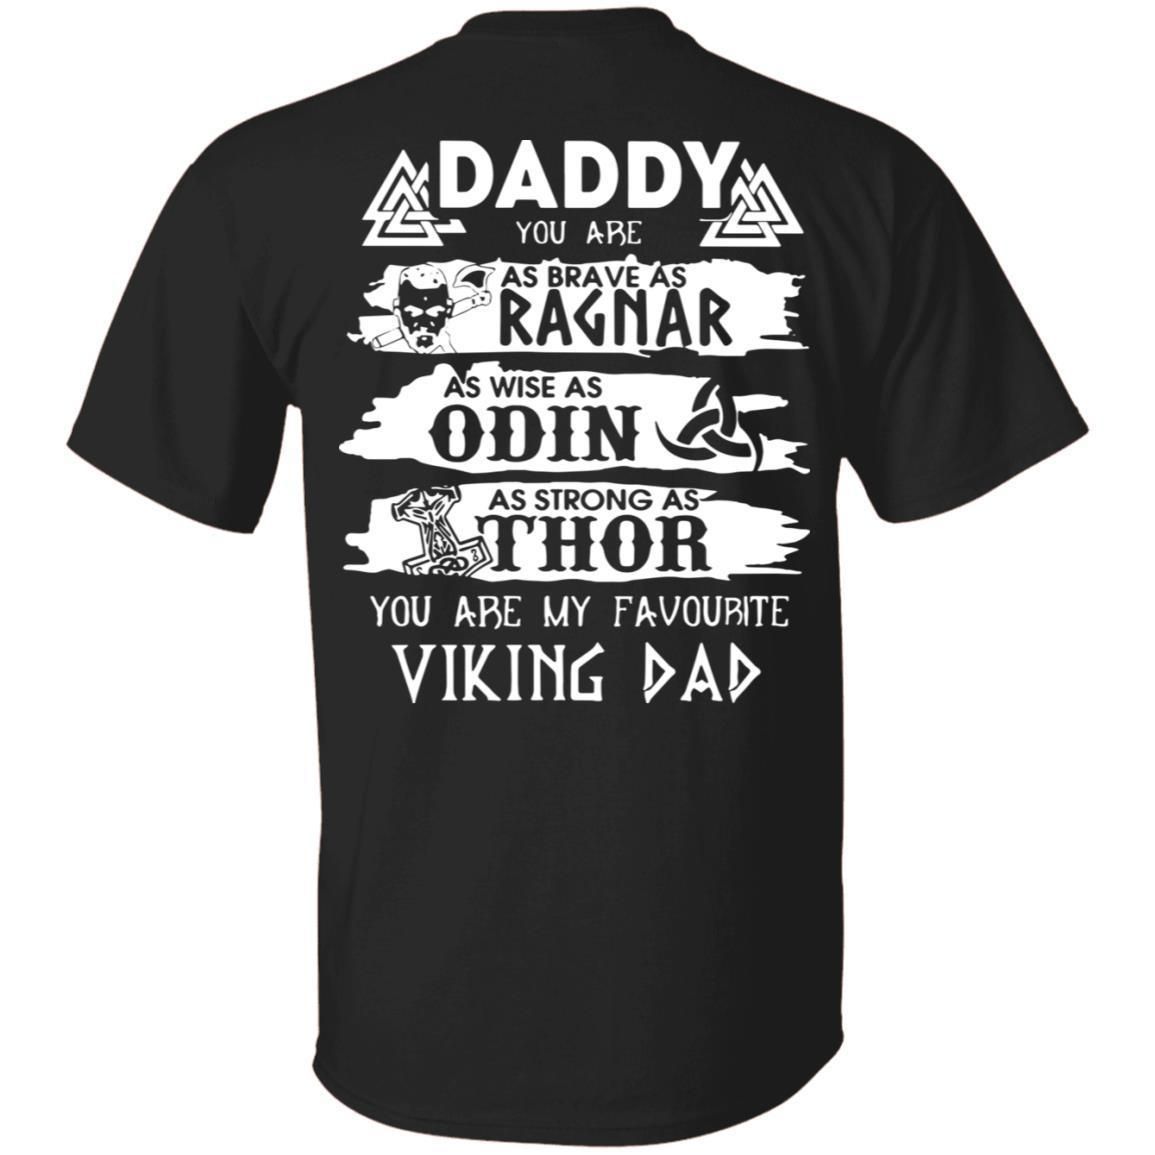 Daddy You Are As Brave As Ragnar As Wise As Odin As Strong As Thor shirts back side